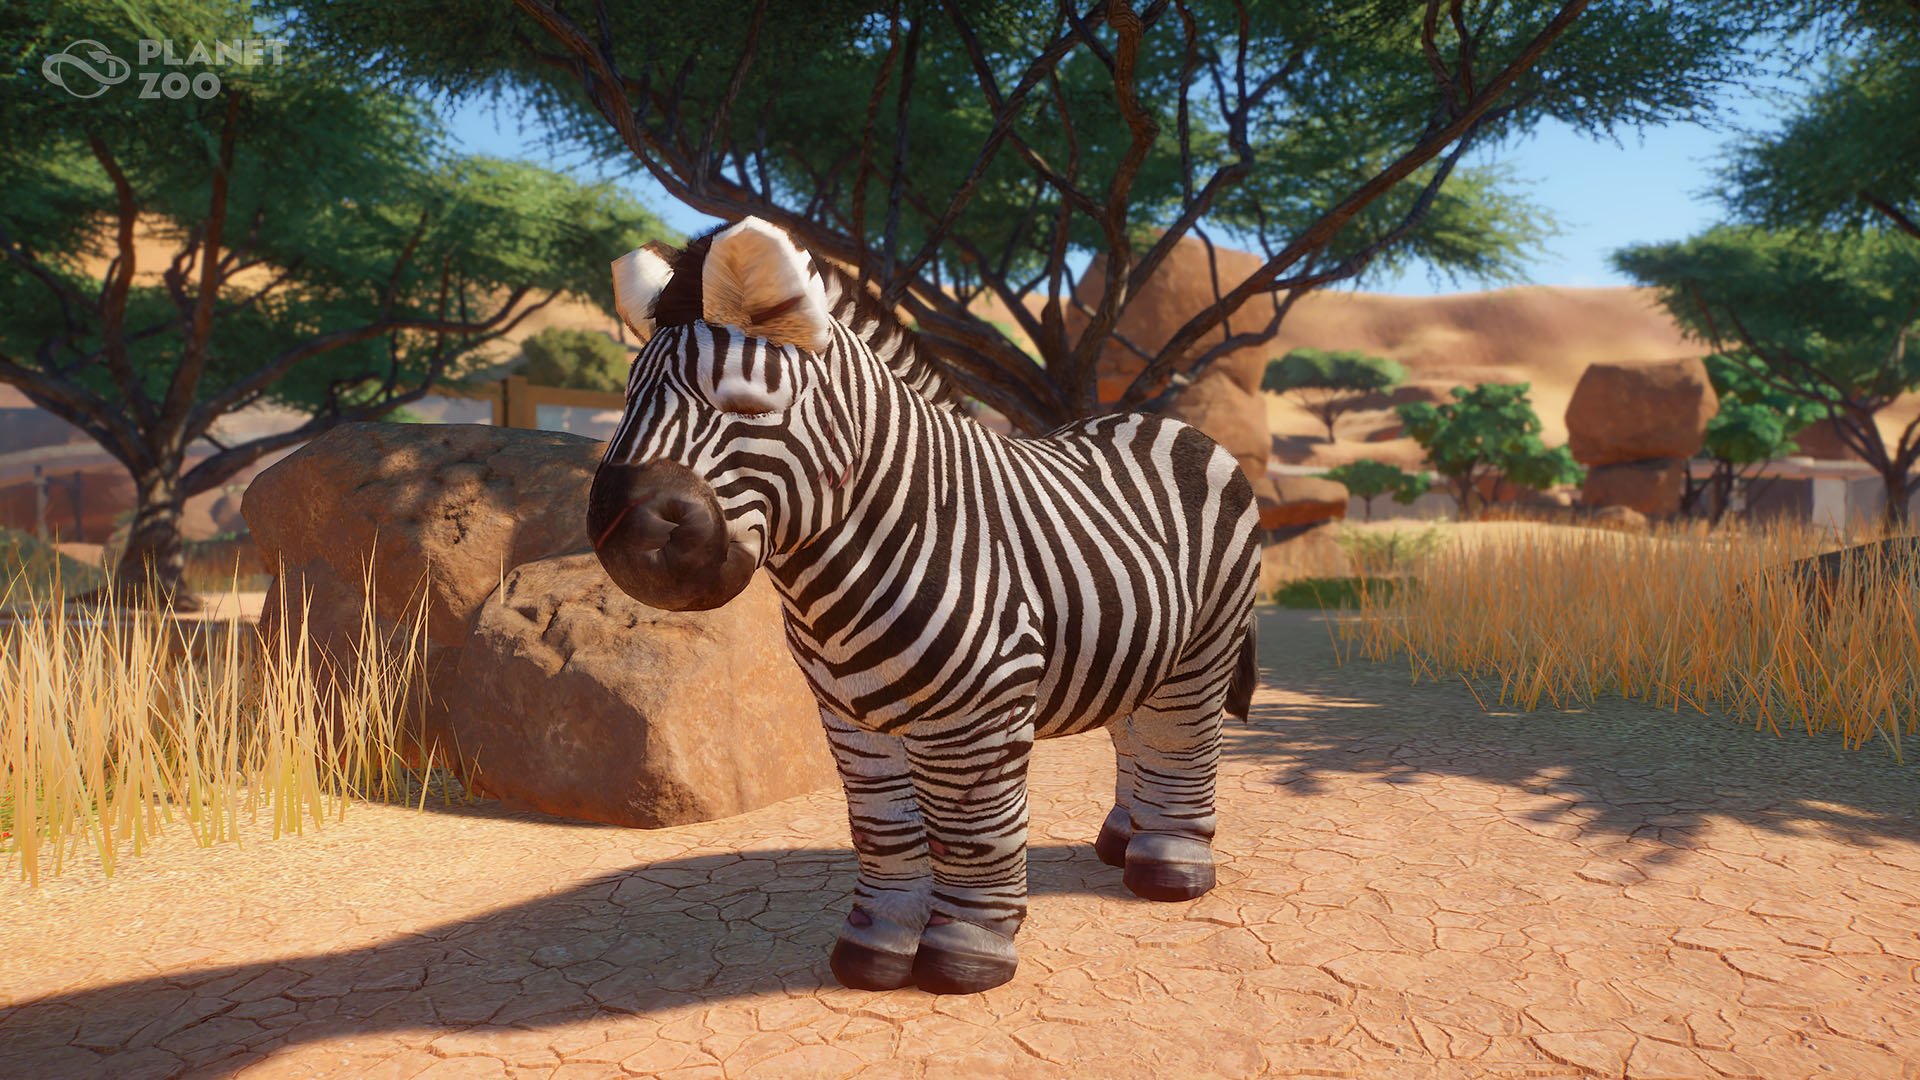 Planet Zoo's animals get super chonky with newly unlocked Easter eggs |  PCGamesN